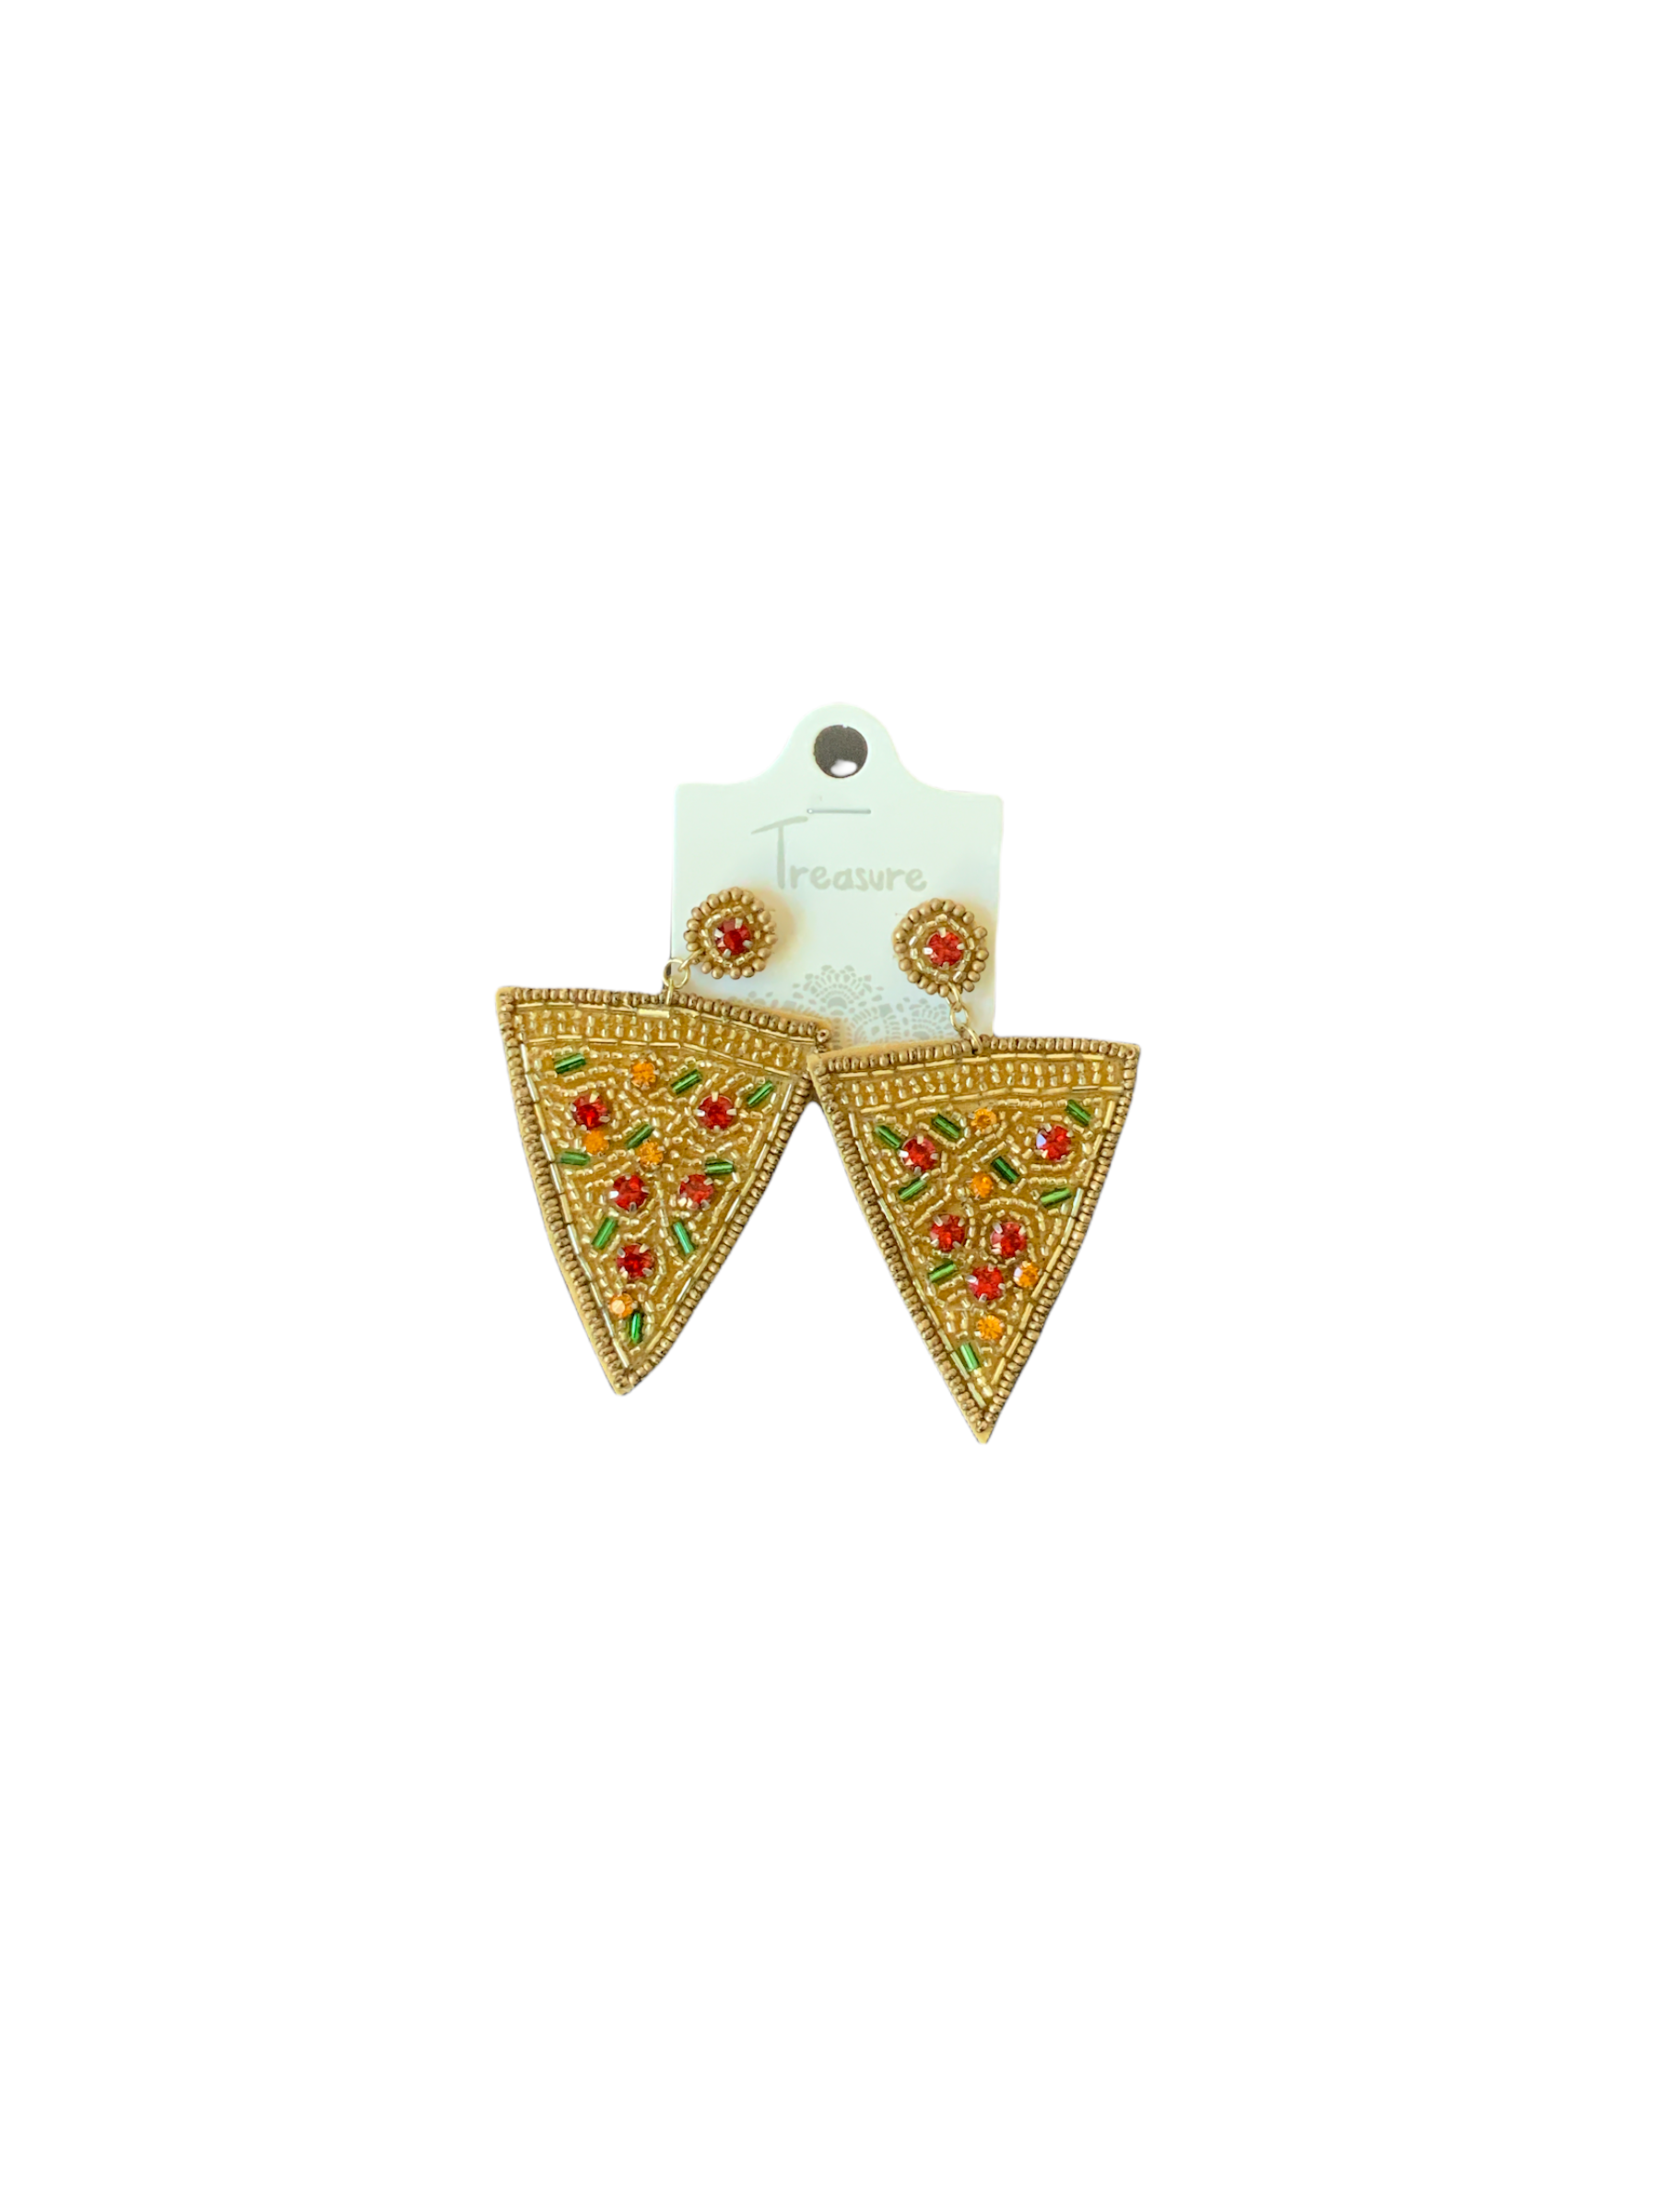 PIZZA EARRINGS - Baby Bums Clothing 